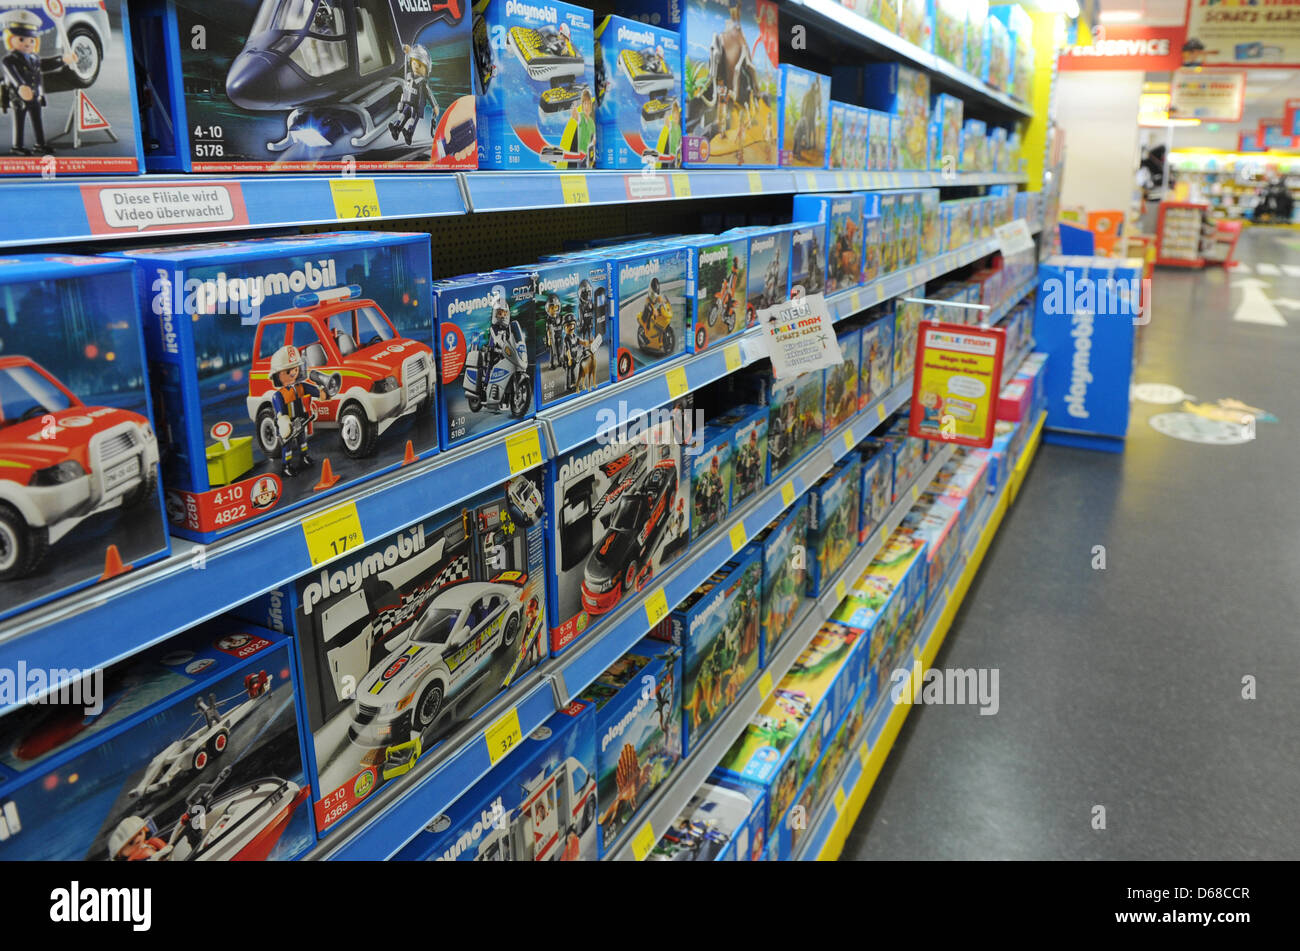 Playmobil toys sit on a shelf in a toy store in Berlin, Germany, 19 June  2012. Photo: Jens Kalaene Stock Photo - Alamy